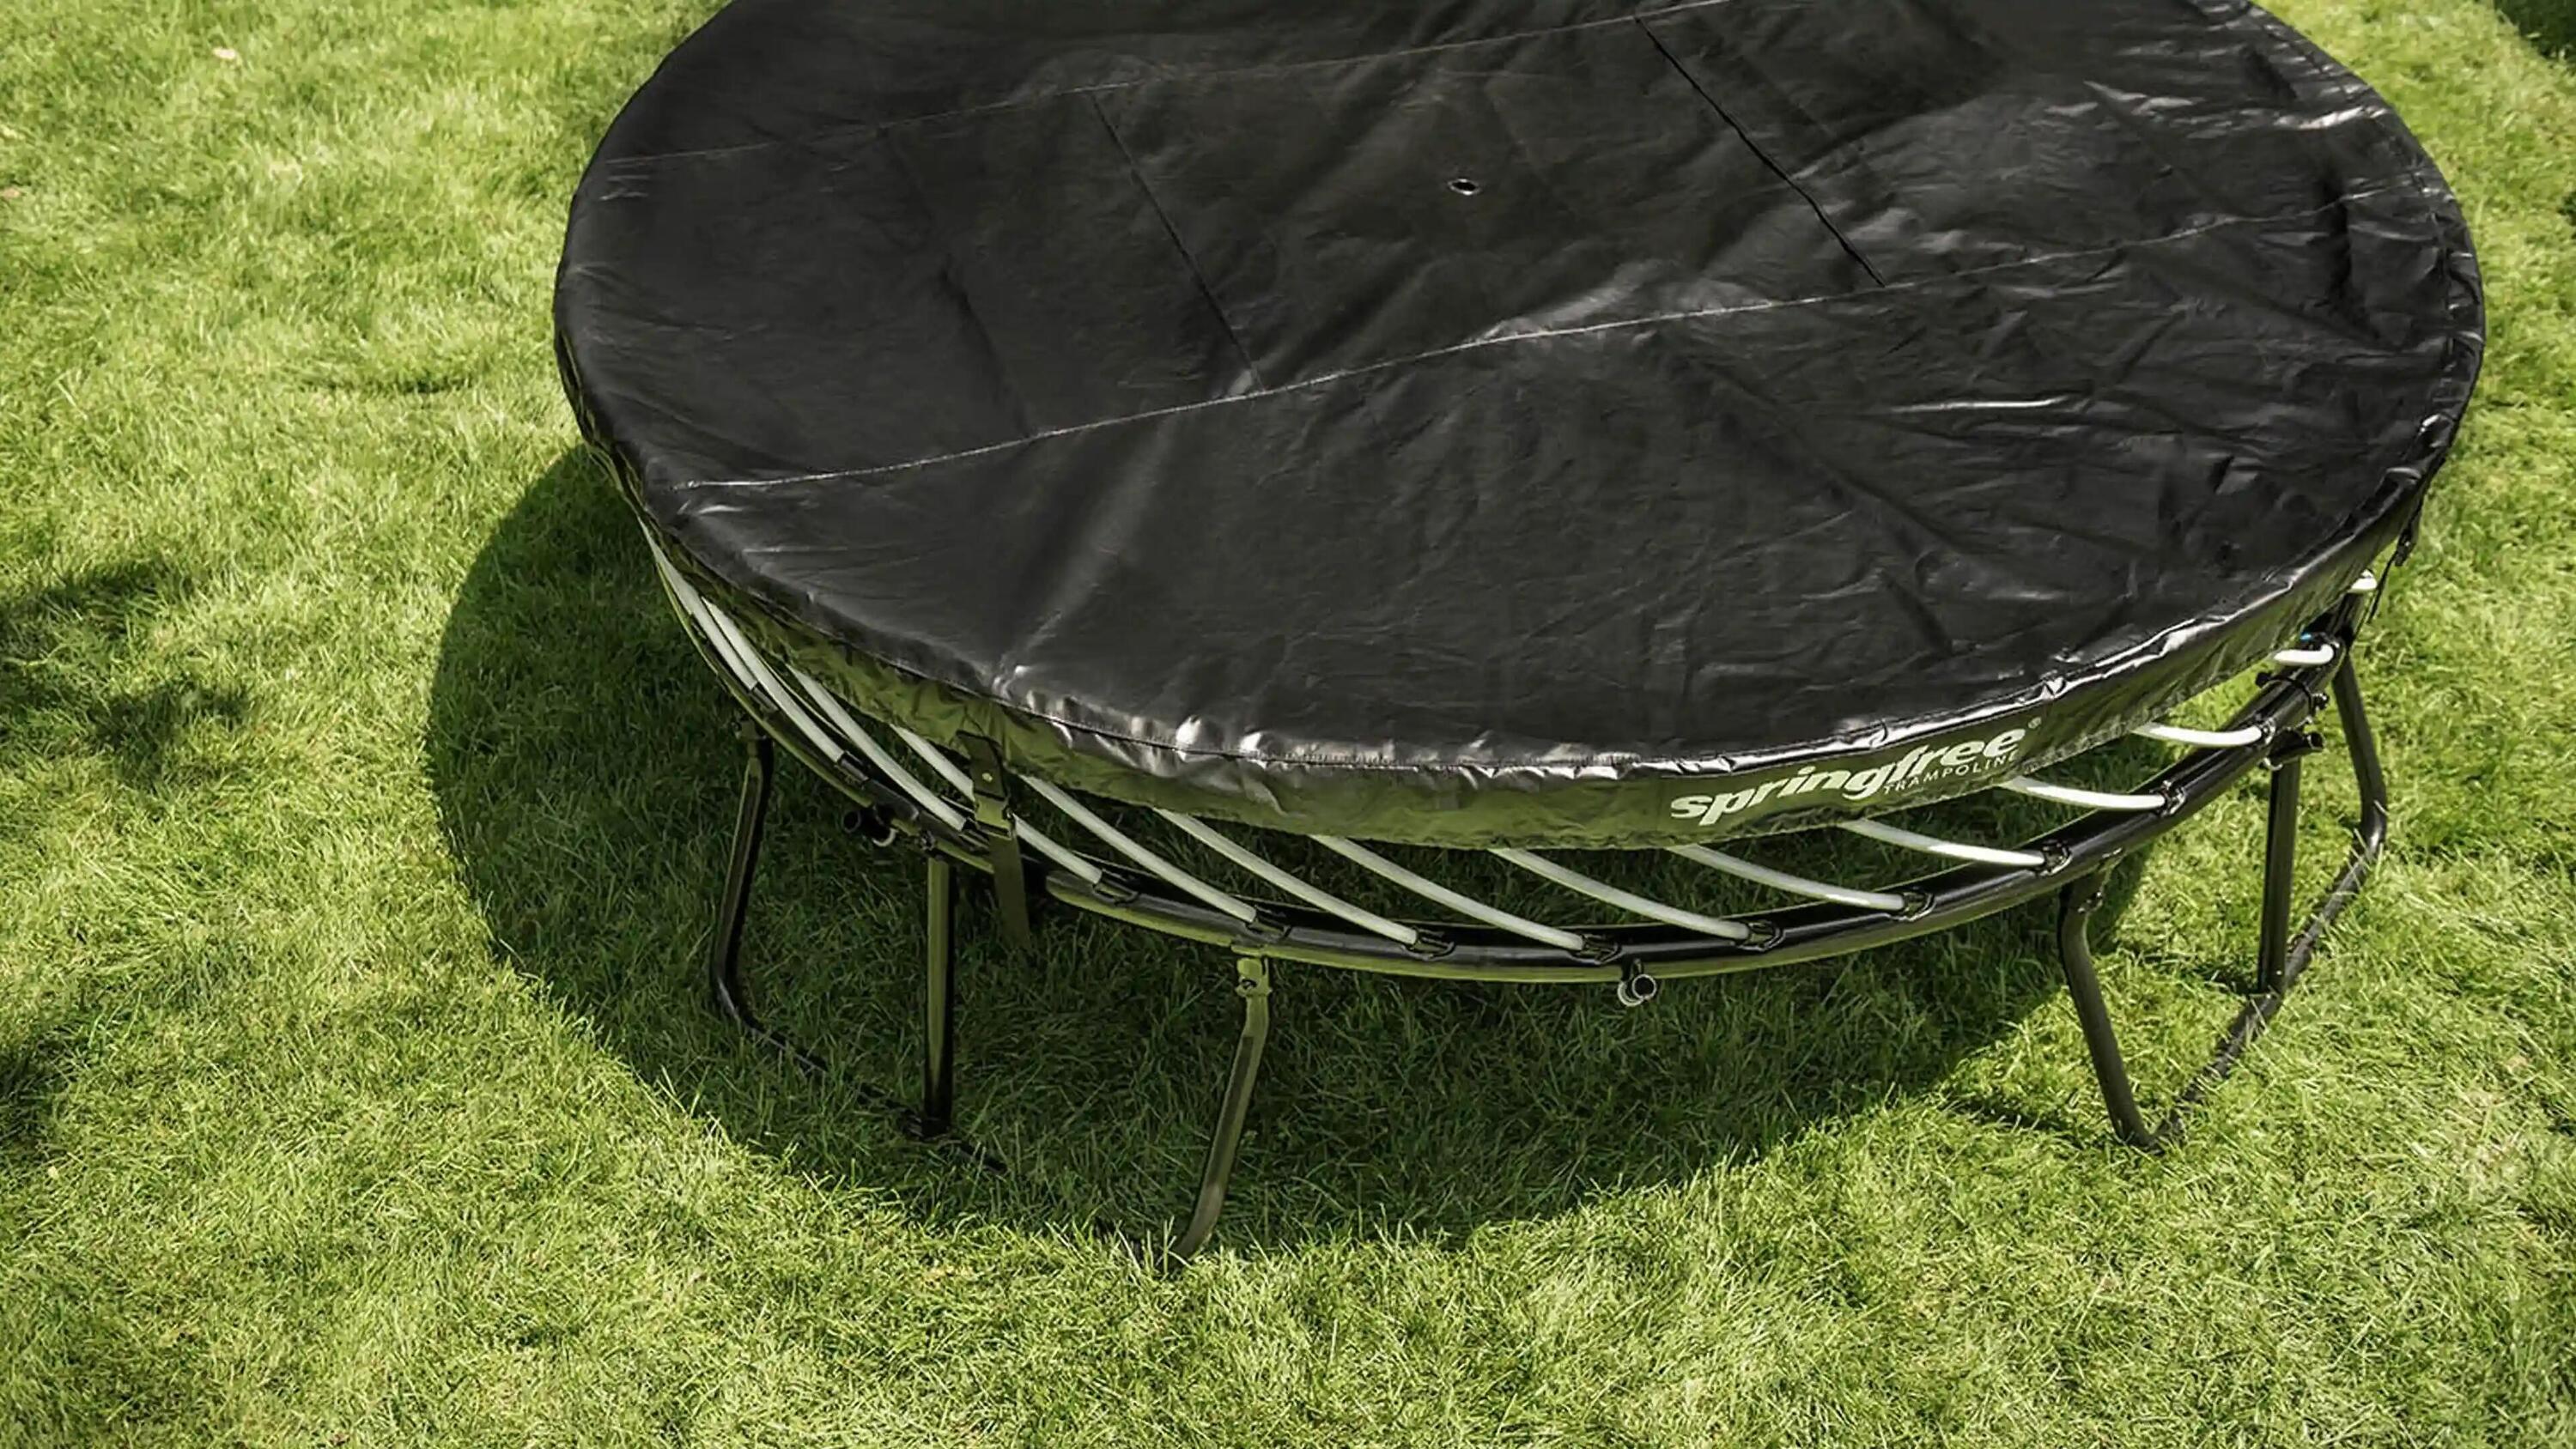 Springfree Trampoline All-Weather Cover for Medium Oval 2/3